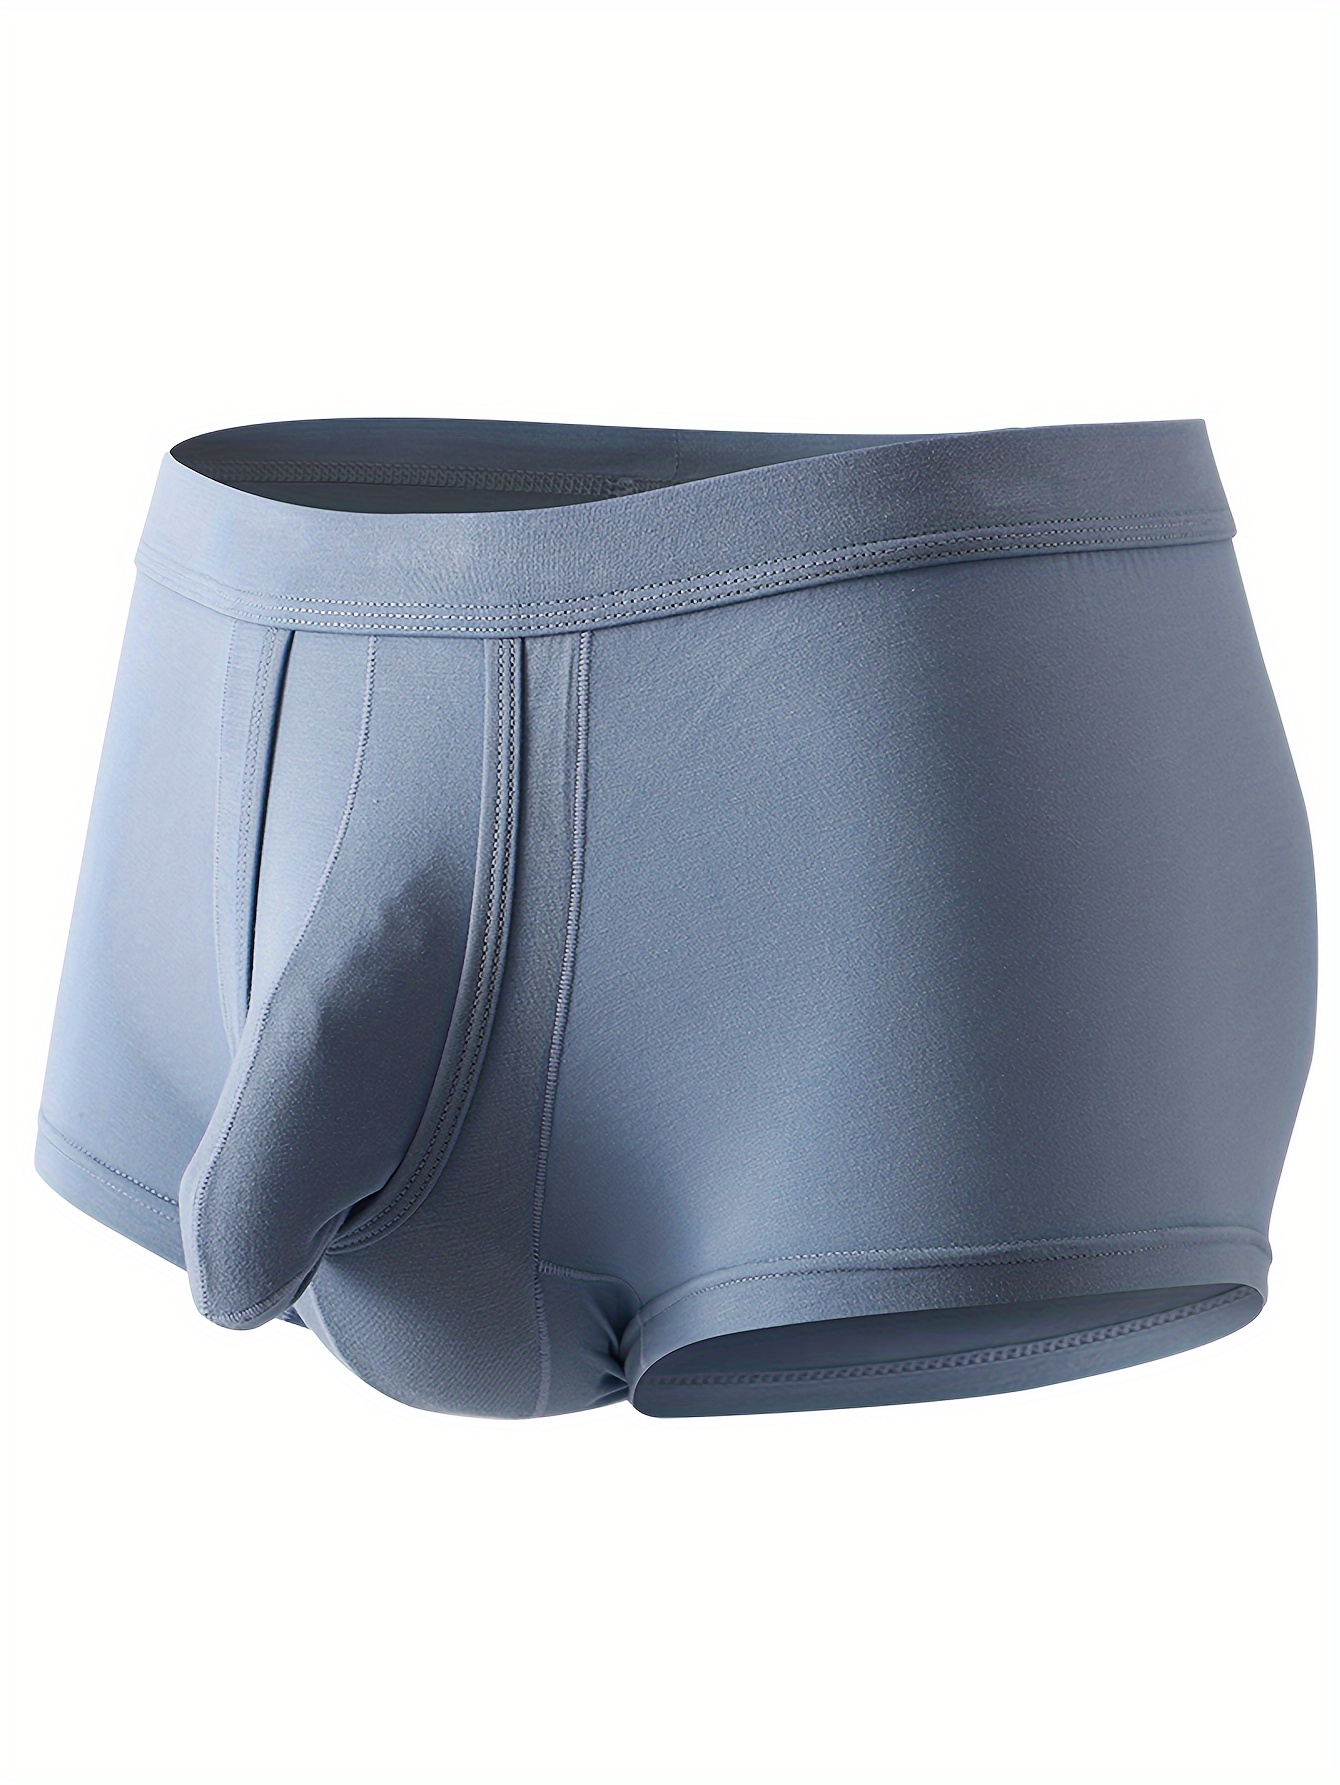 Mens Lightweight Breathable Modal Open Boxer Boxer Briefs With Pouch With  Anti Chafing Short Leg And Tagless Separate Dual Pouch Underwear From  Quentinde, $15.63